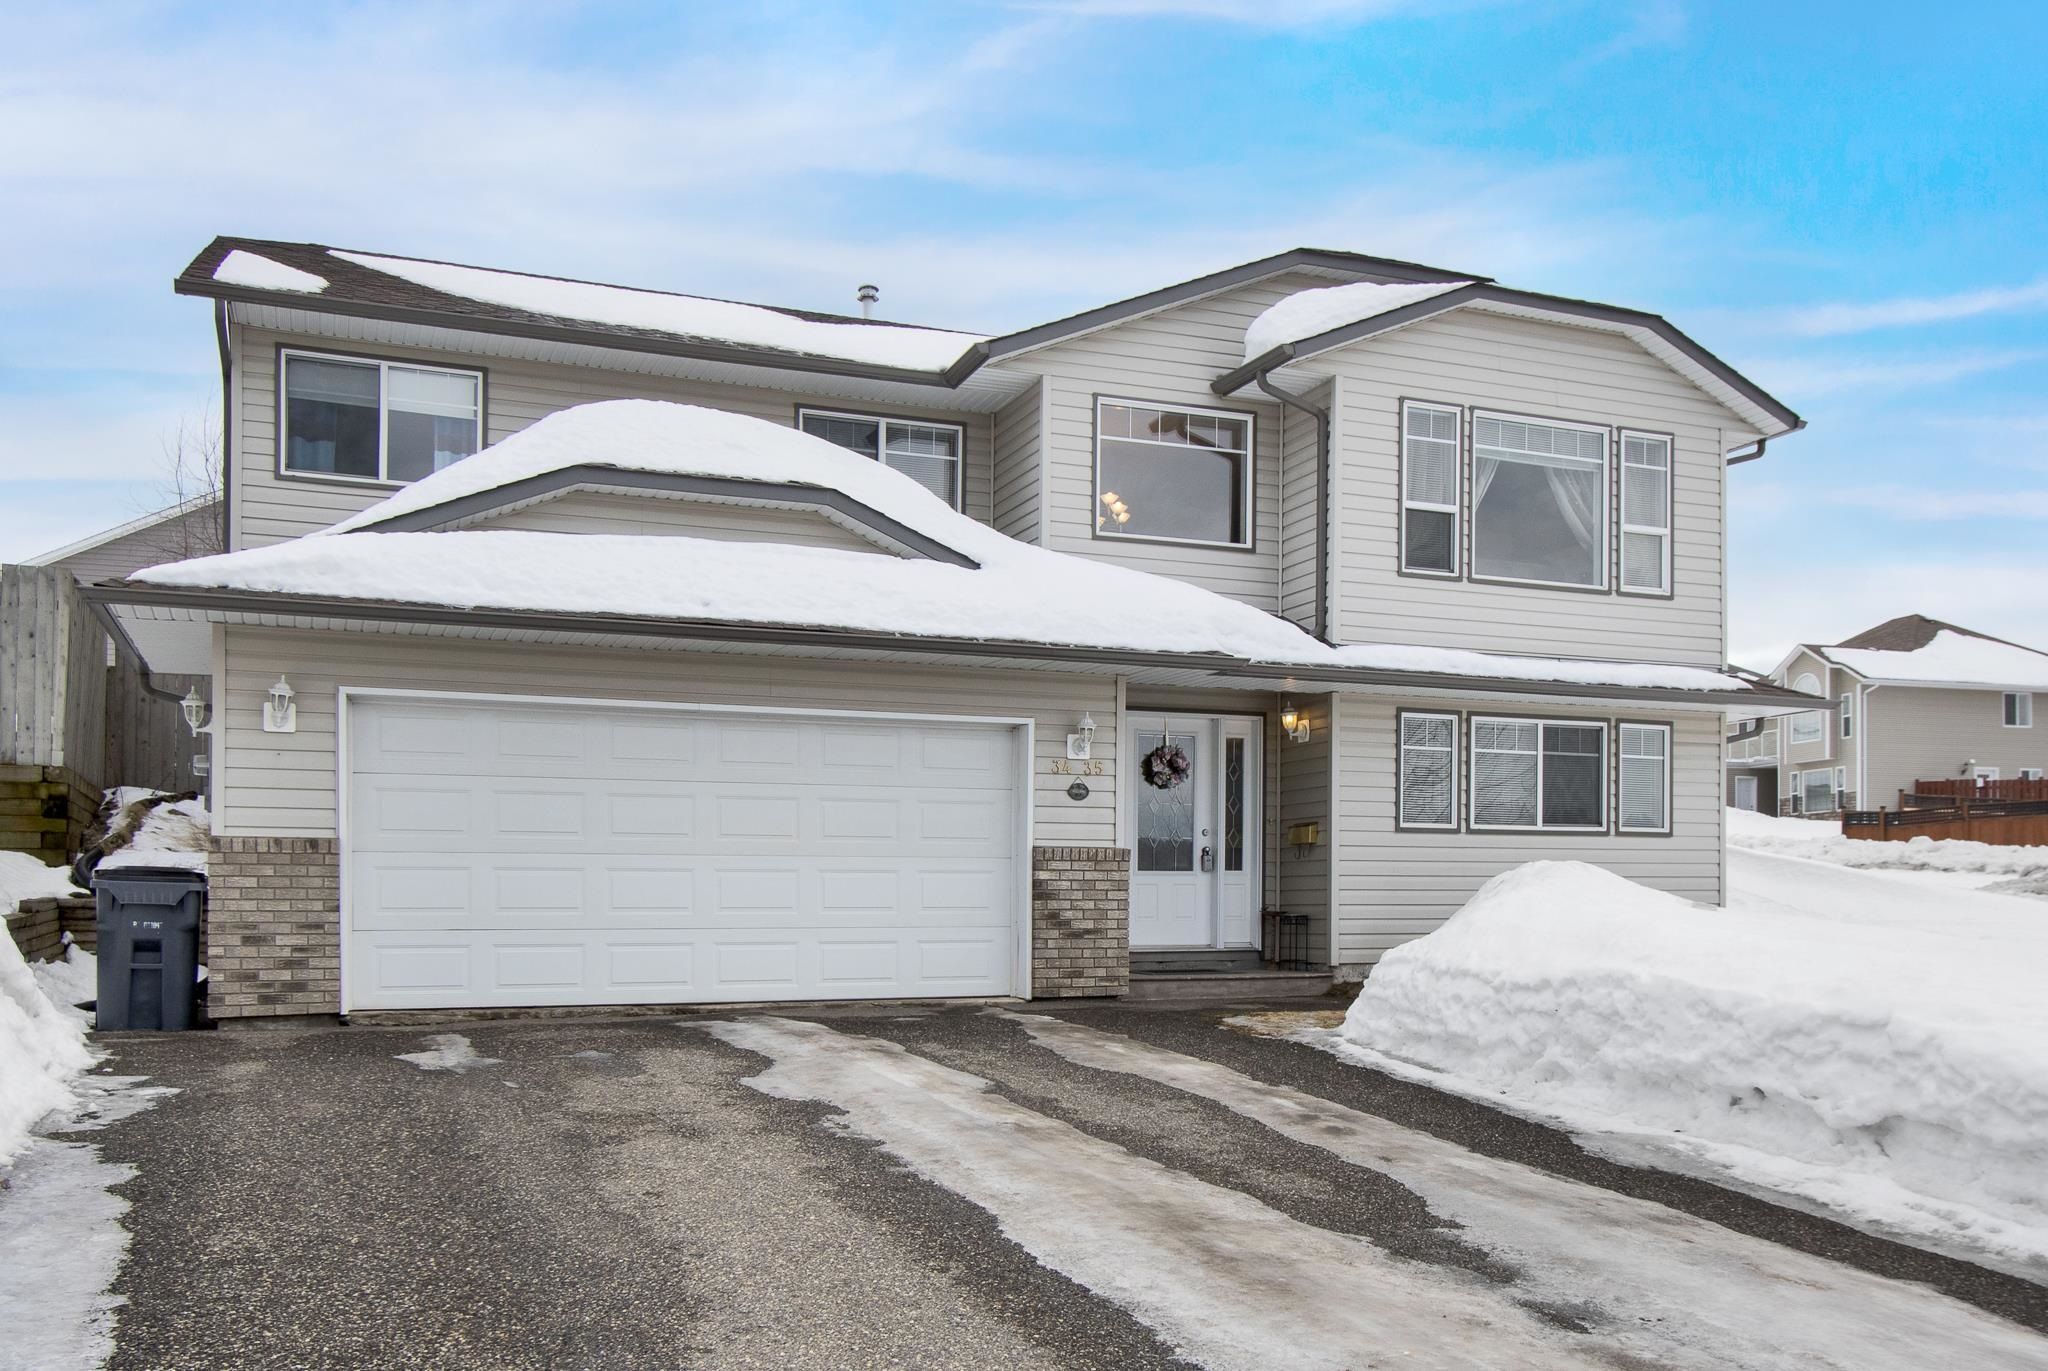 Open House. Open House on Saturday, February 18, 2023 12:00PM - 1:00PM
Please join Ricki and check out this amazing home 4 bdrm (possibility of 5) 3 bath home in a fantastic area.